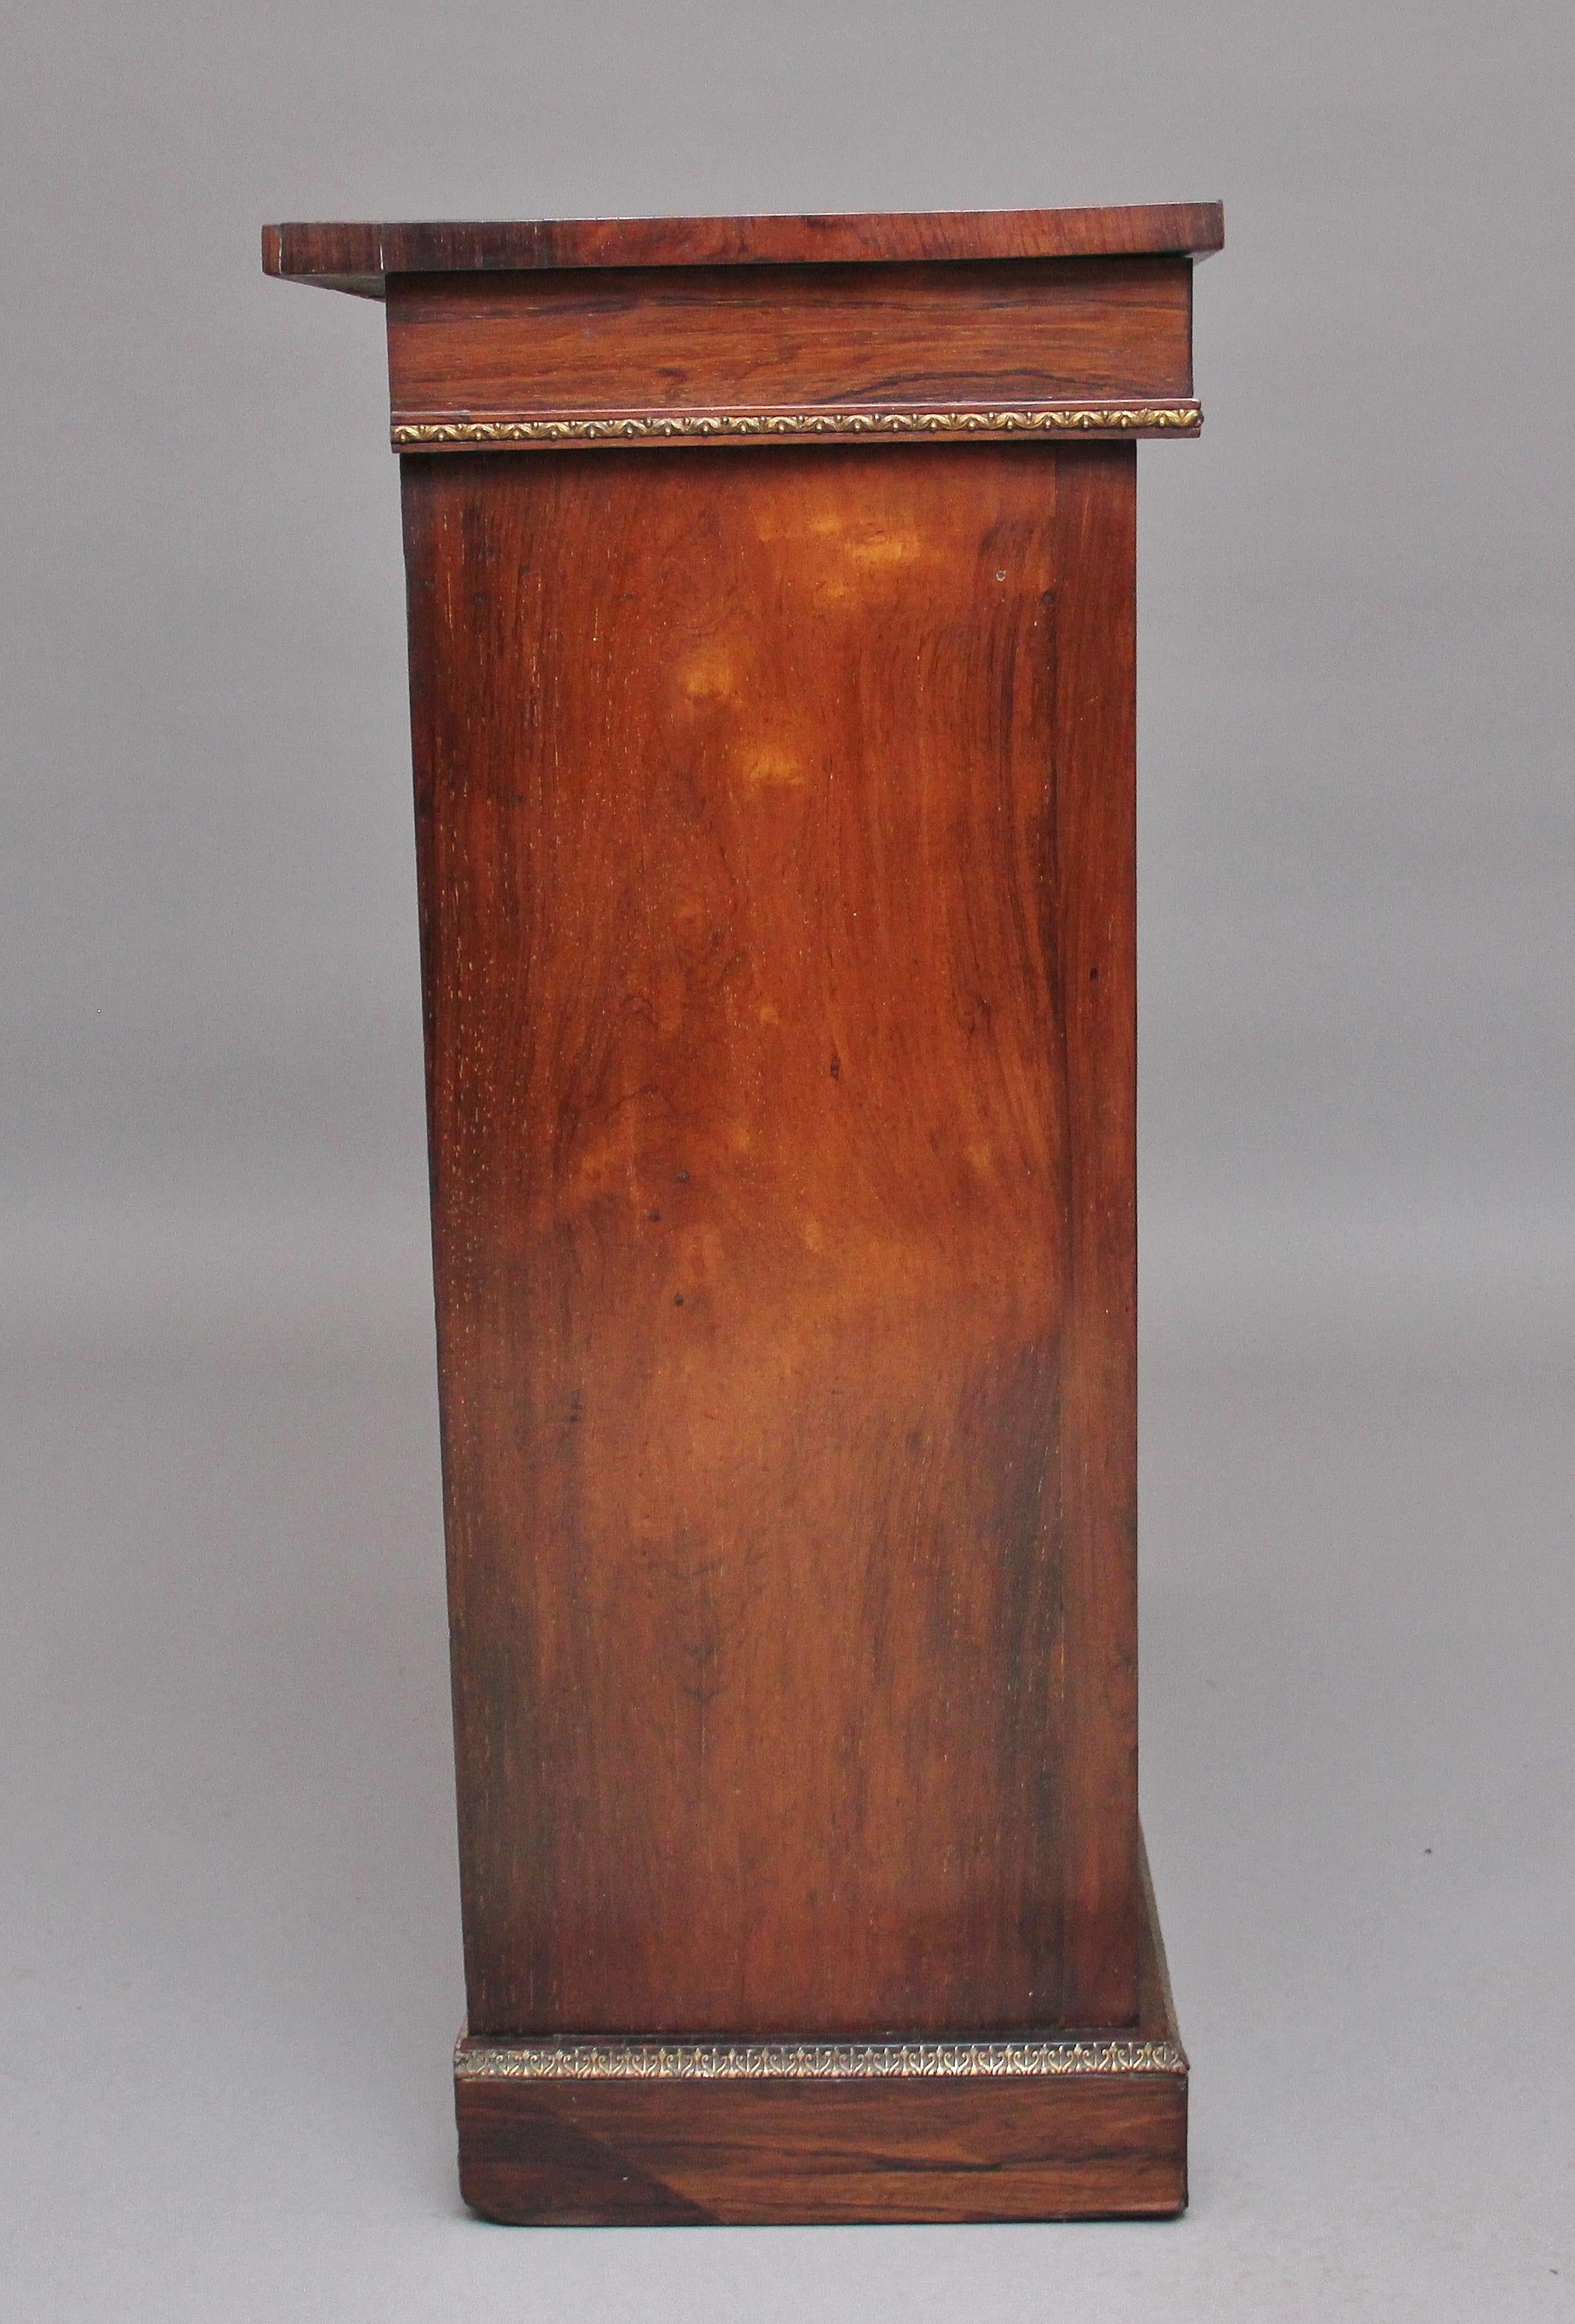 Regency Early 19th Century Rosewood and Brass Inlaid Open Bookcase For Sale